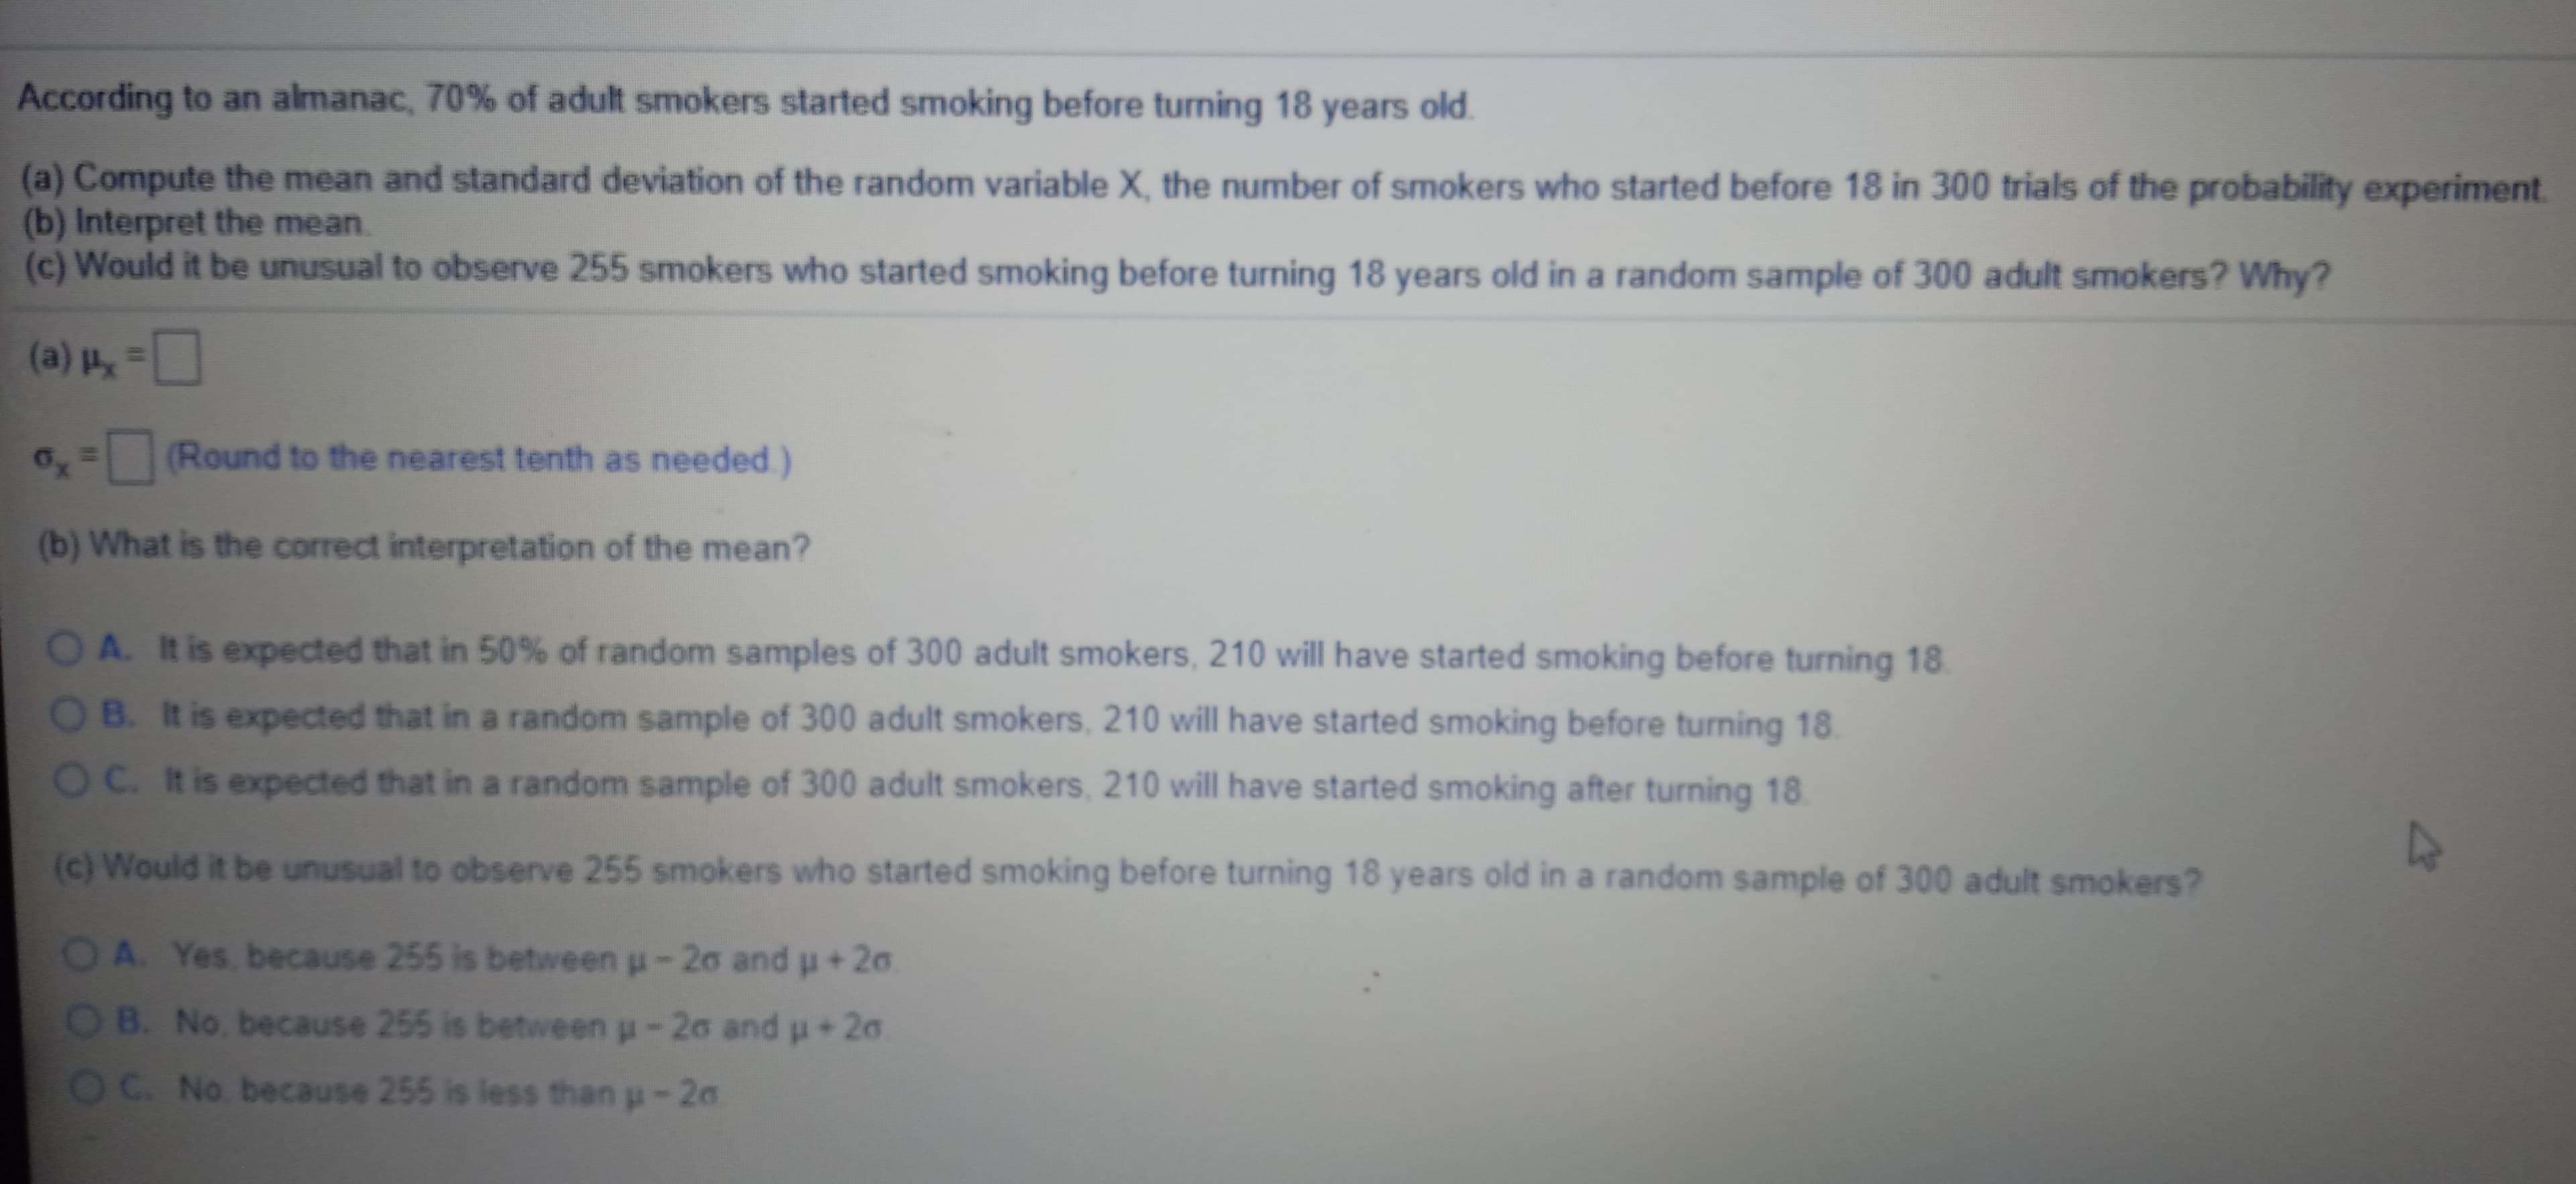 According to an almanac, 70% of adult smokers started smoking before turning 18 years old.
(a) Compute the mean and standard deviation of the random variable X, the number of smokers who started before 18 in 300 trials of the probability experiment.
(b) Interpret the mean.
(c) Would it be unusual to observe 255 smokers who started smoking before turning 18 years old in a random sample of 300 adult smokers? Why?
